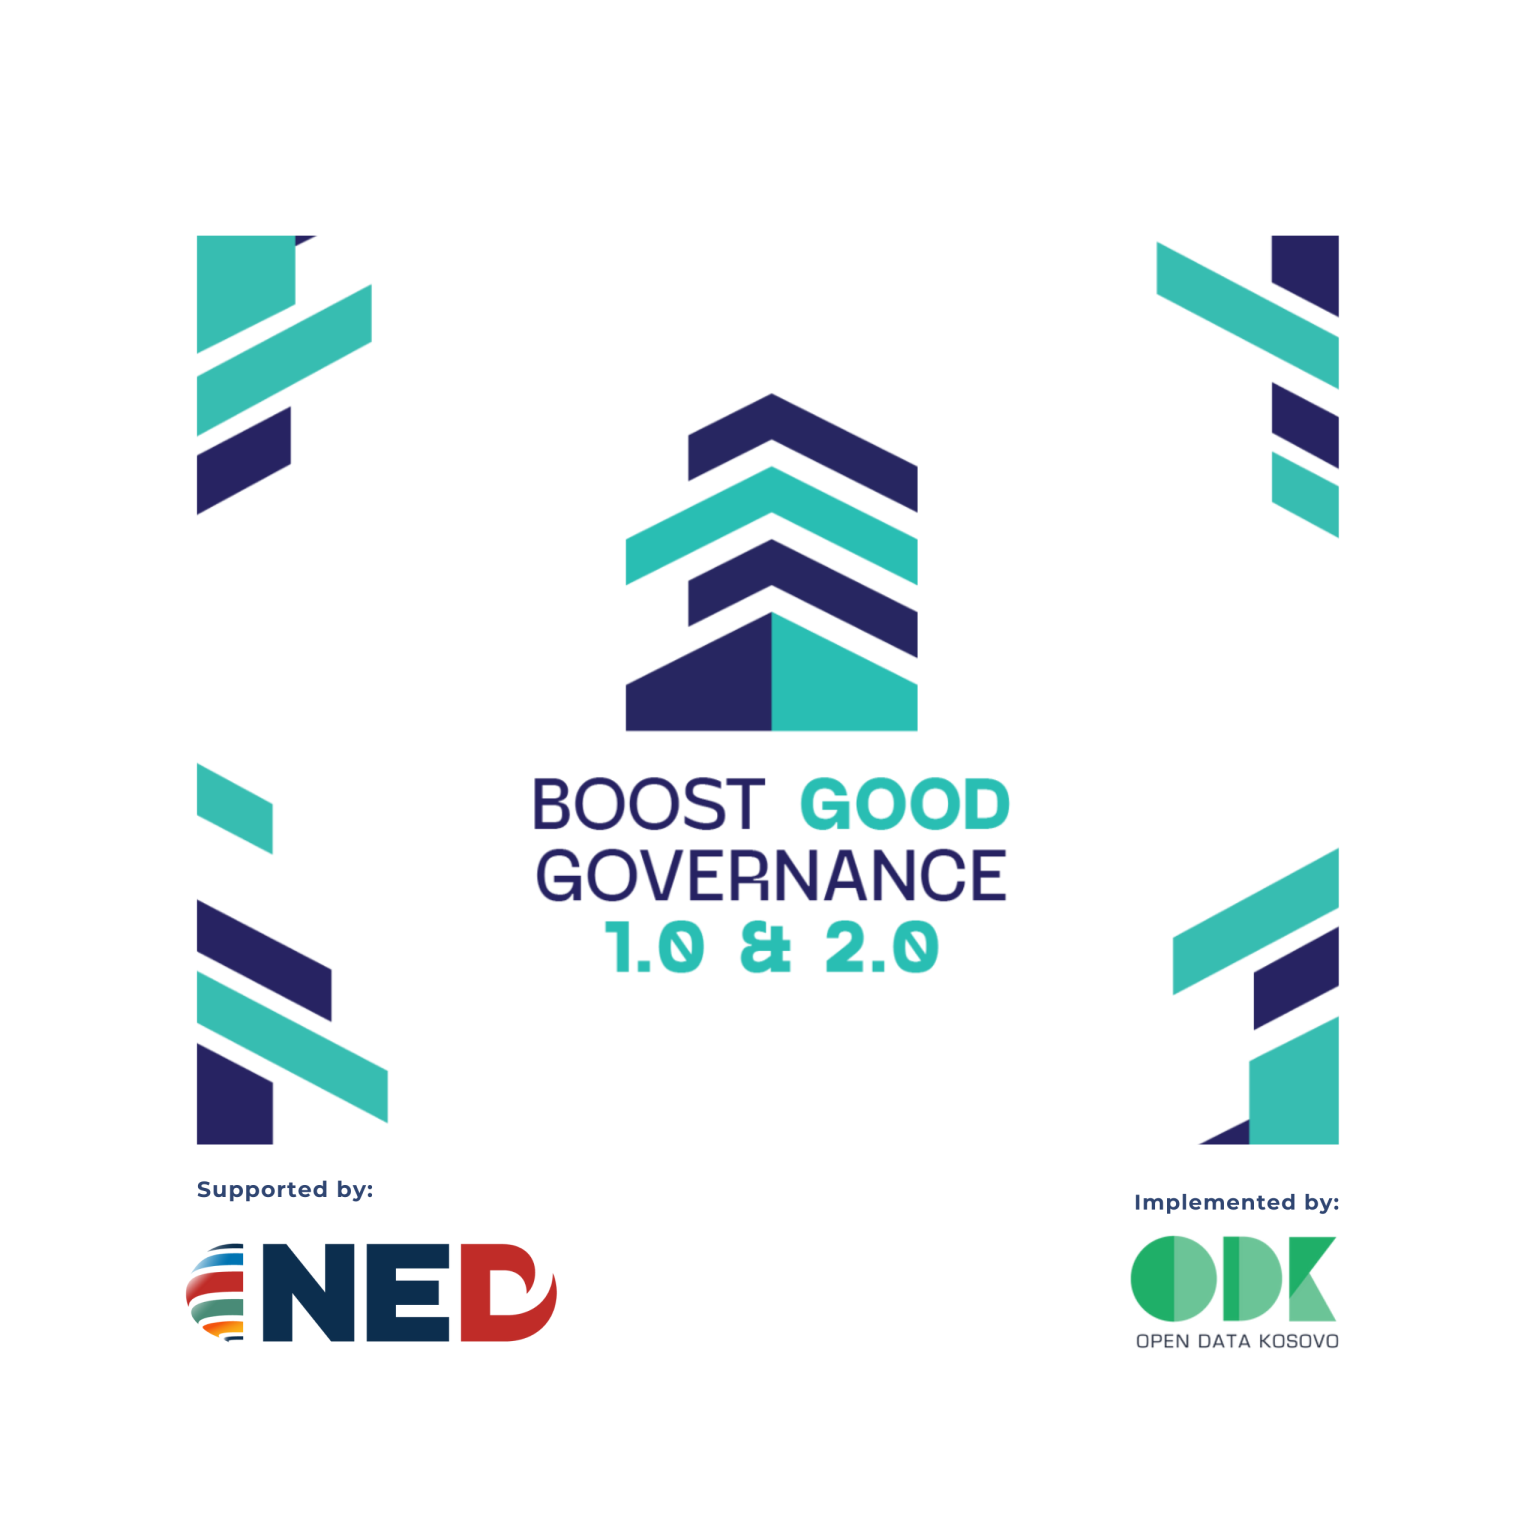 Boost Good Governance 3.0 and 4.0